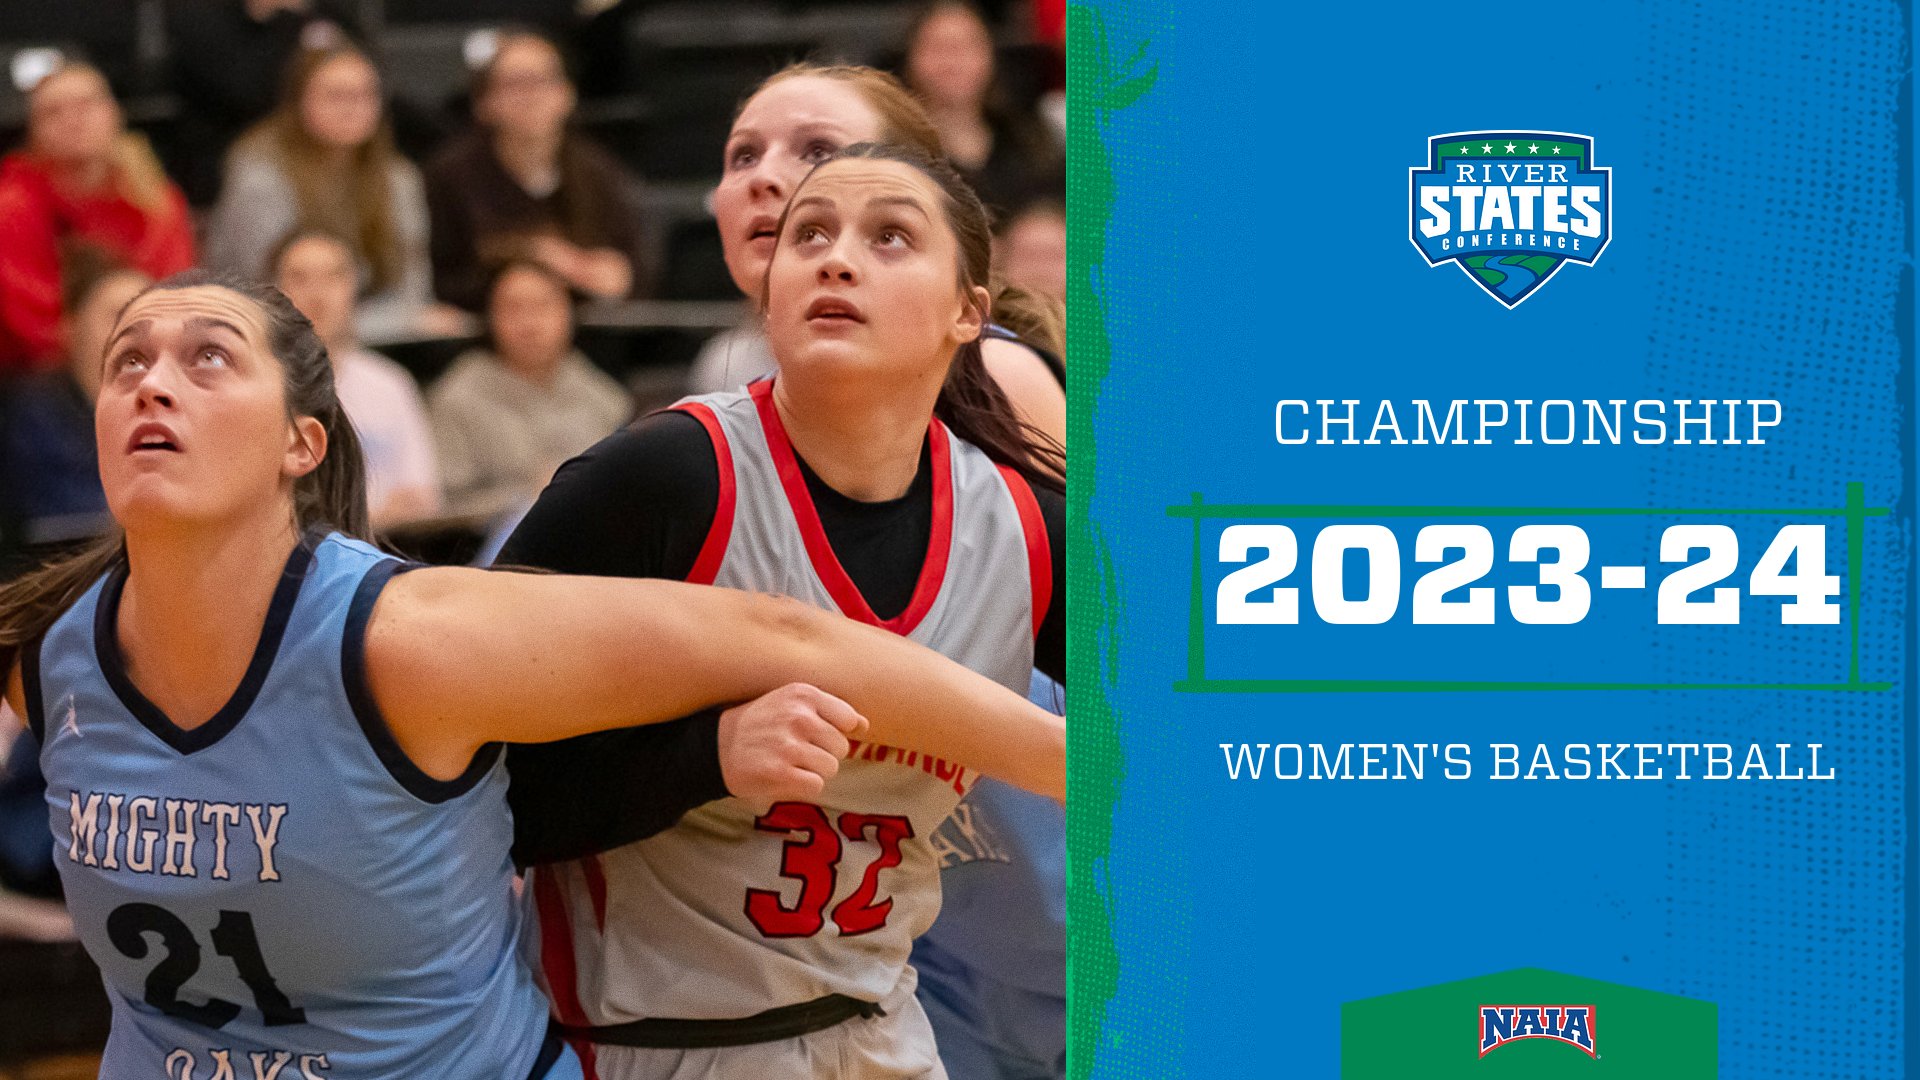 RSC Women's Basketball Championship: 10 teams Feb. 26-March 5 at Campus Sites